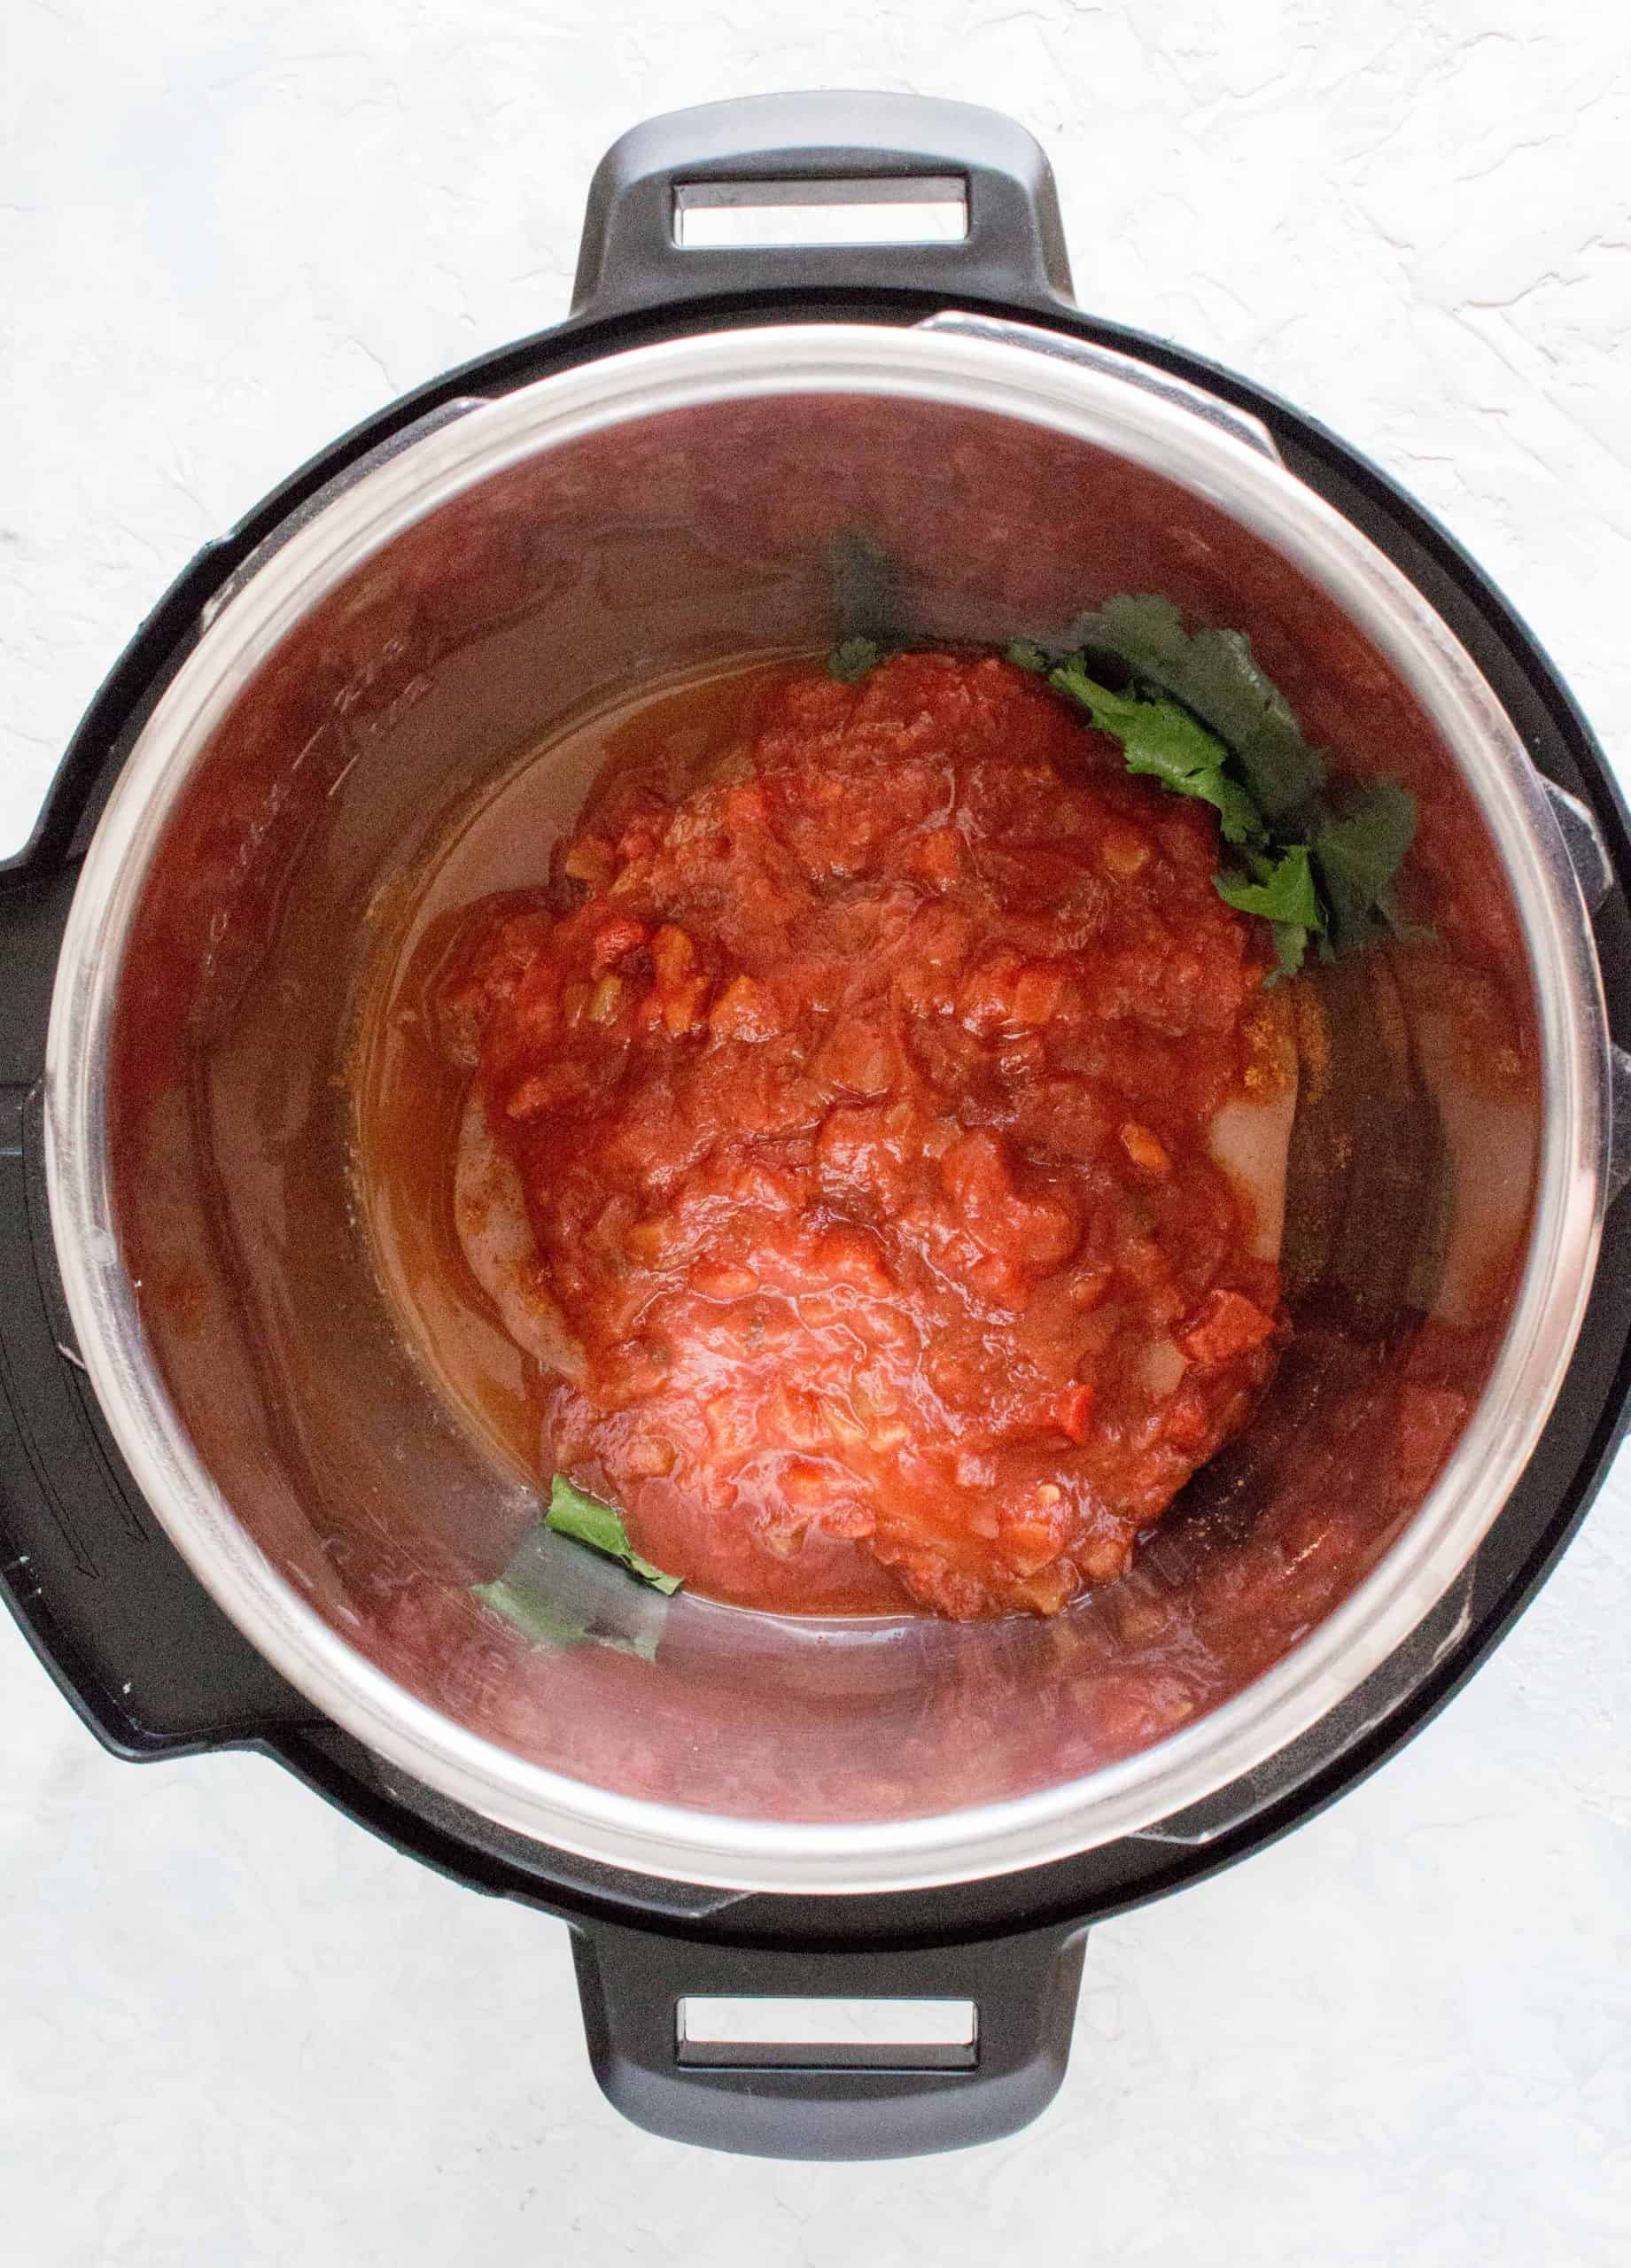 salsa layered on top of chicken in the instant pot